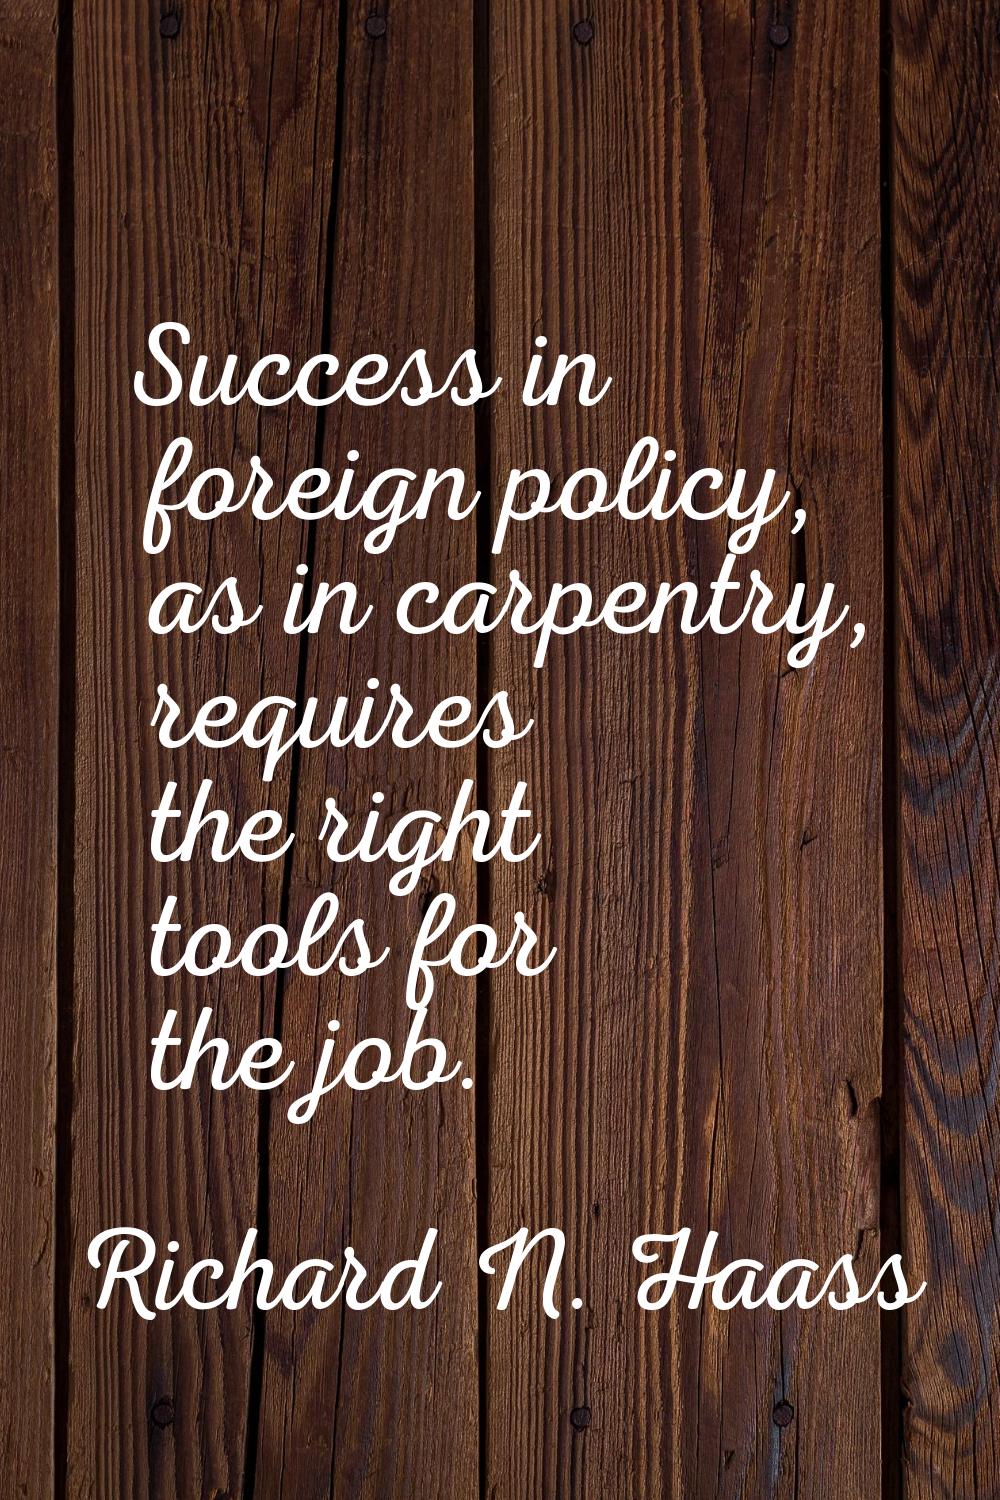 Success in foreign policy, as in carpentry, requires the right tools for the job.